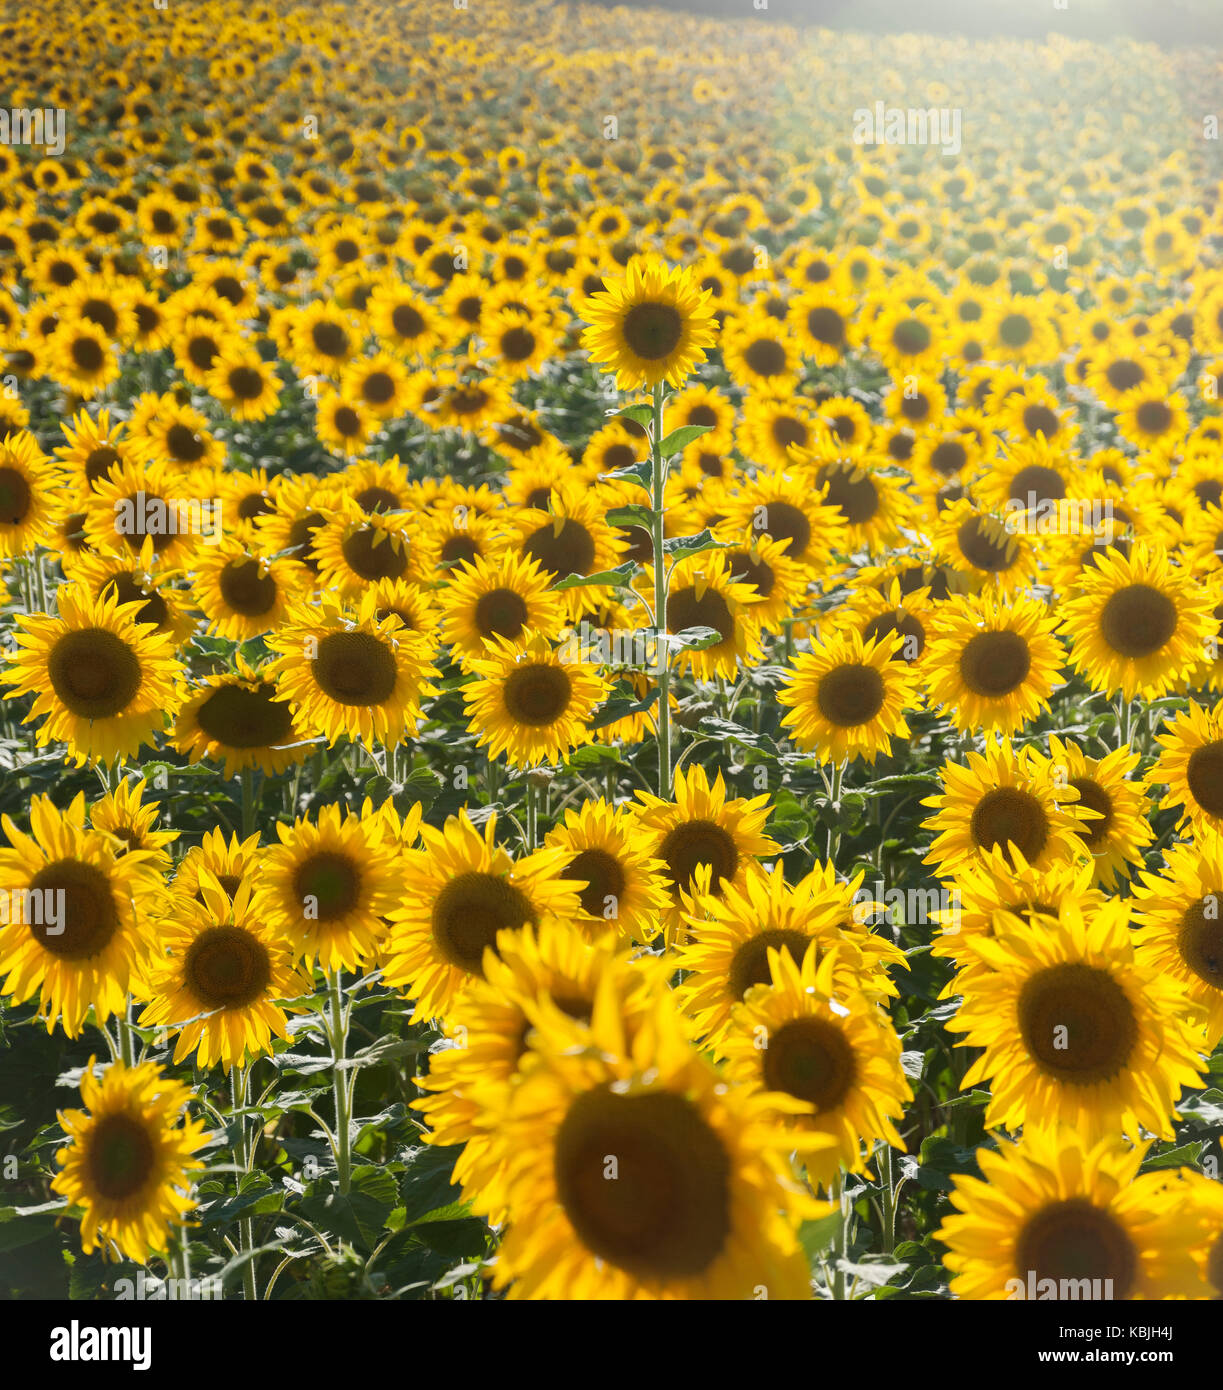 Field of sunflowers in the Vendee, near Mouilleron-en-pareds, France with a single sunflower standing out above the other sunflowers Stock Photo